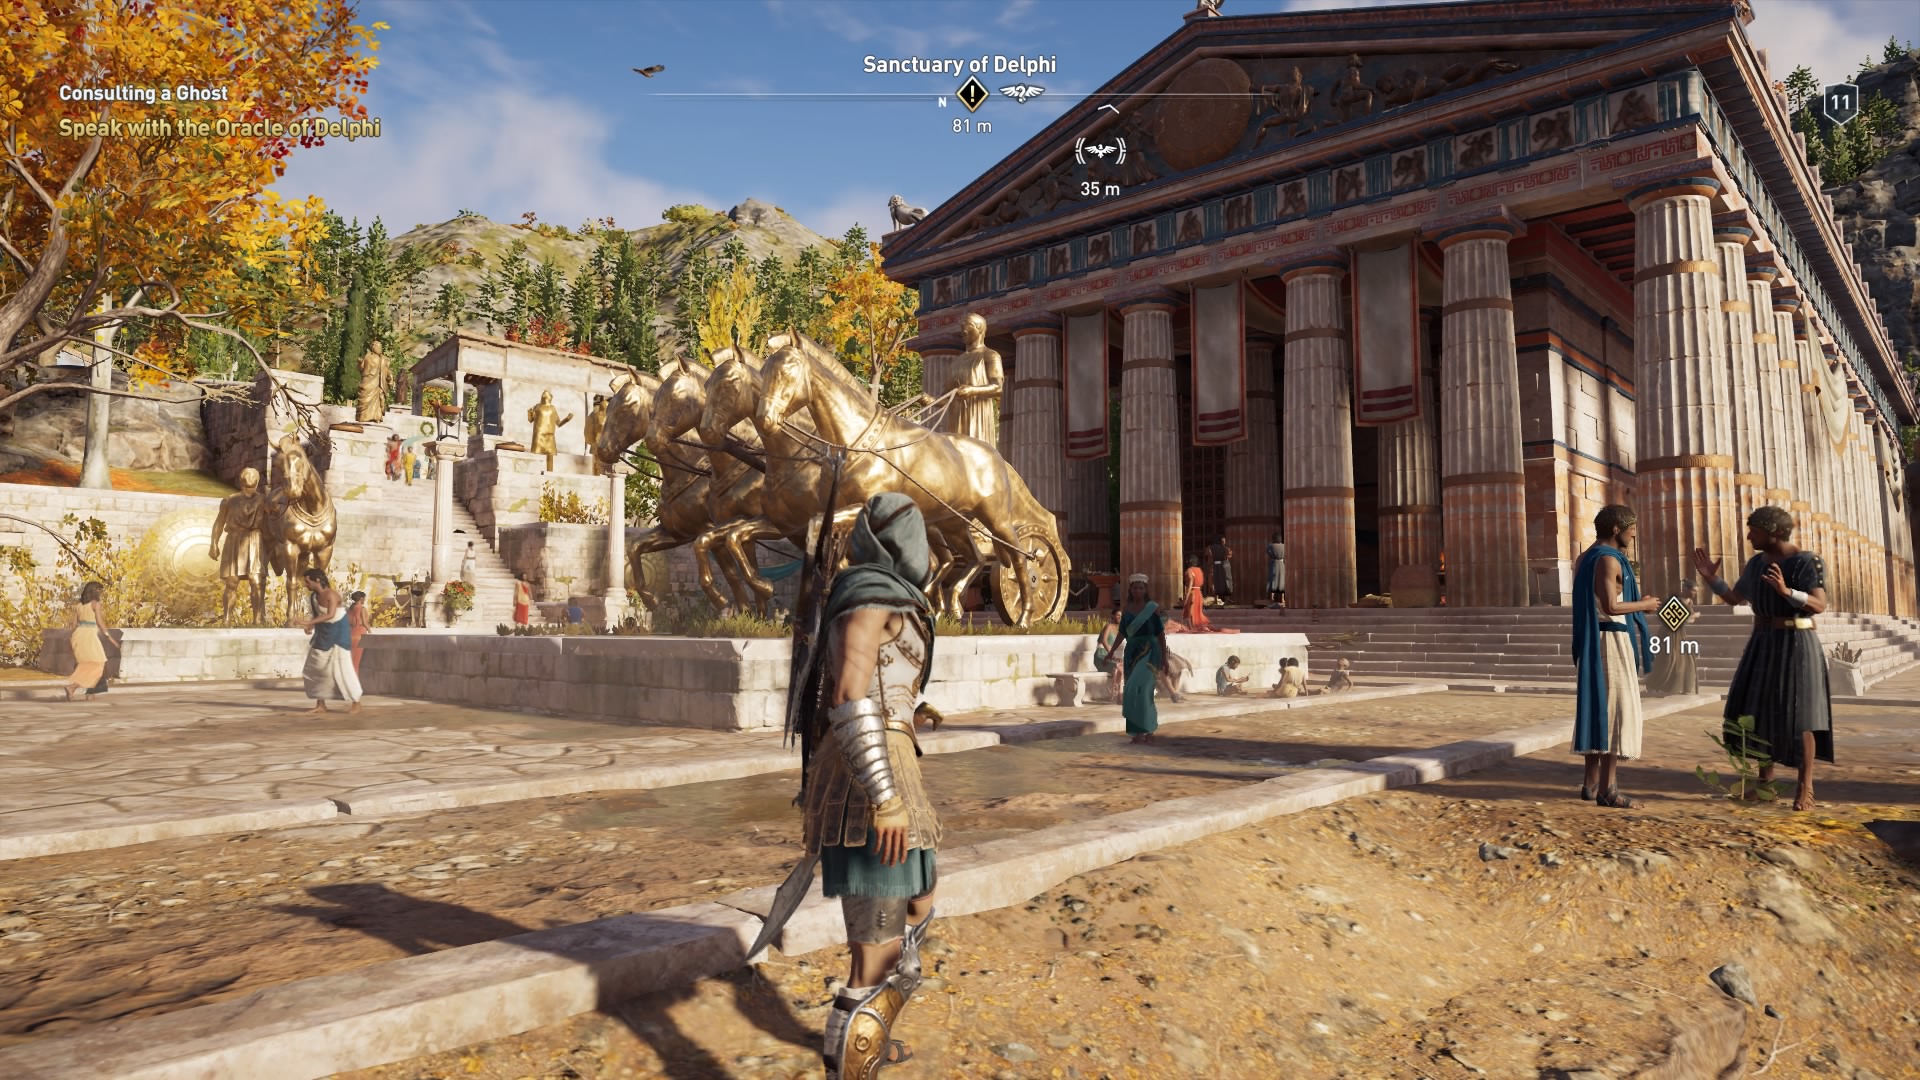 Assassin's Creed Odyssey Review 